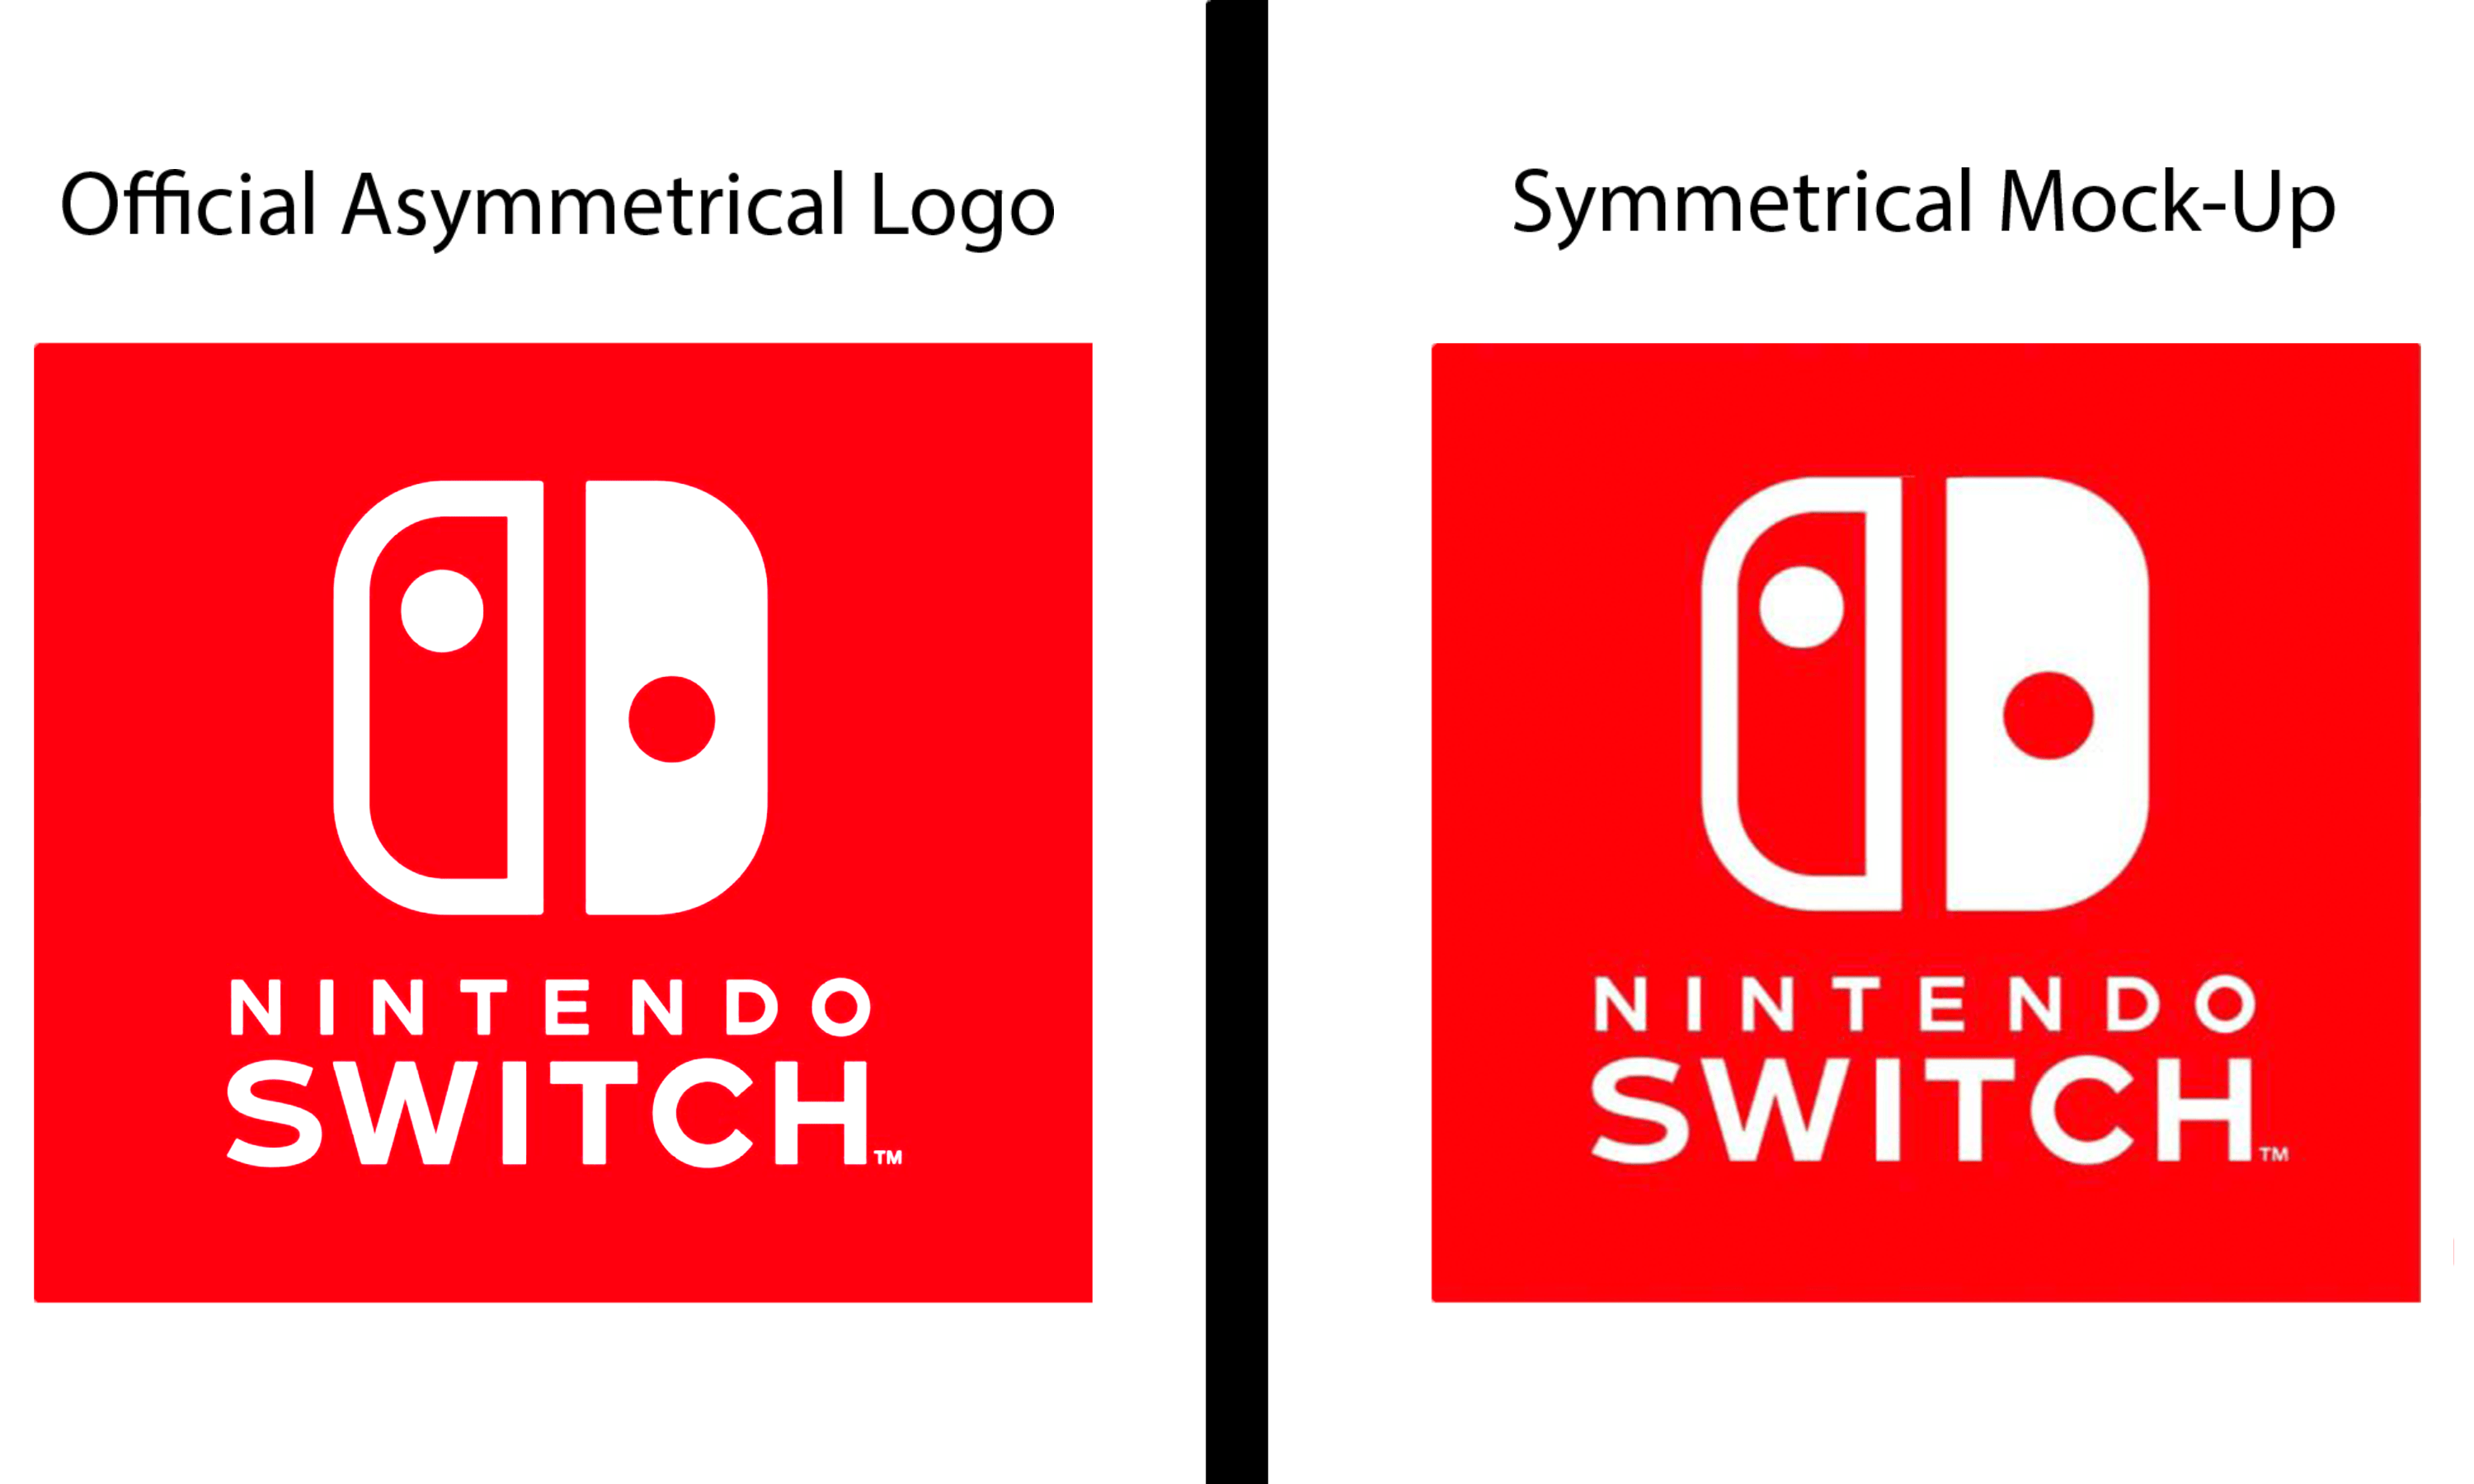 Nintendo Switch Logo - The Nintendo Switch logo is intentionally asymmetrical in order to ...